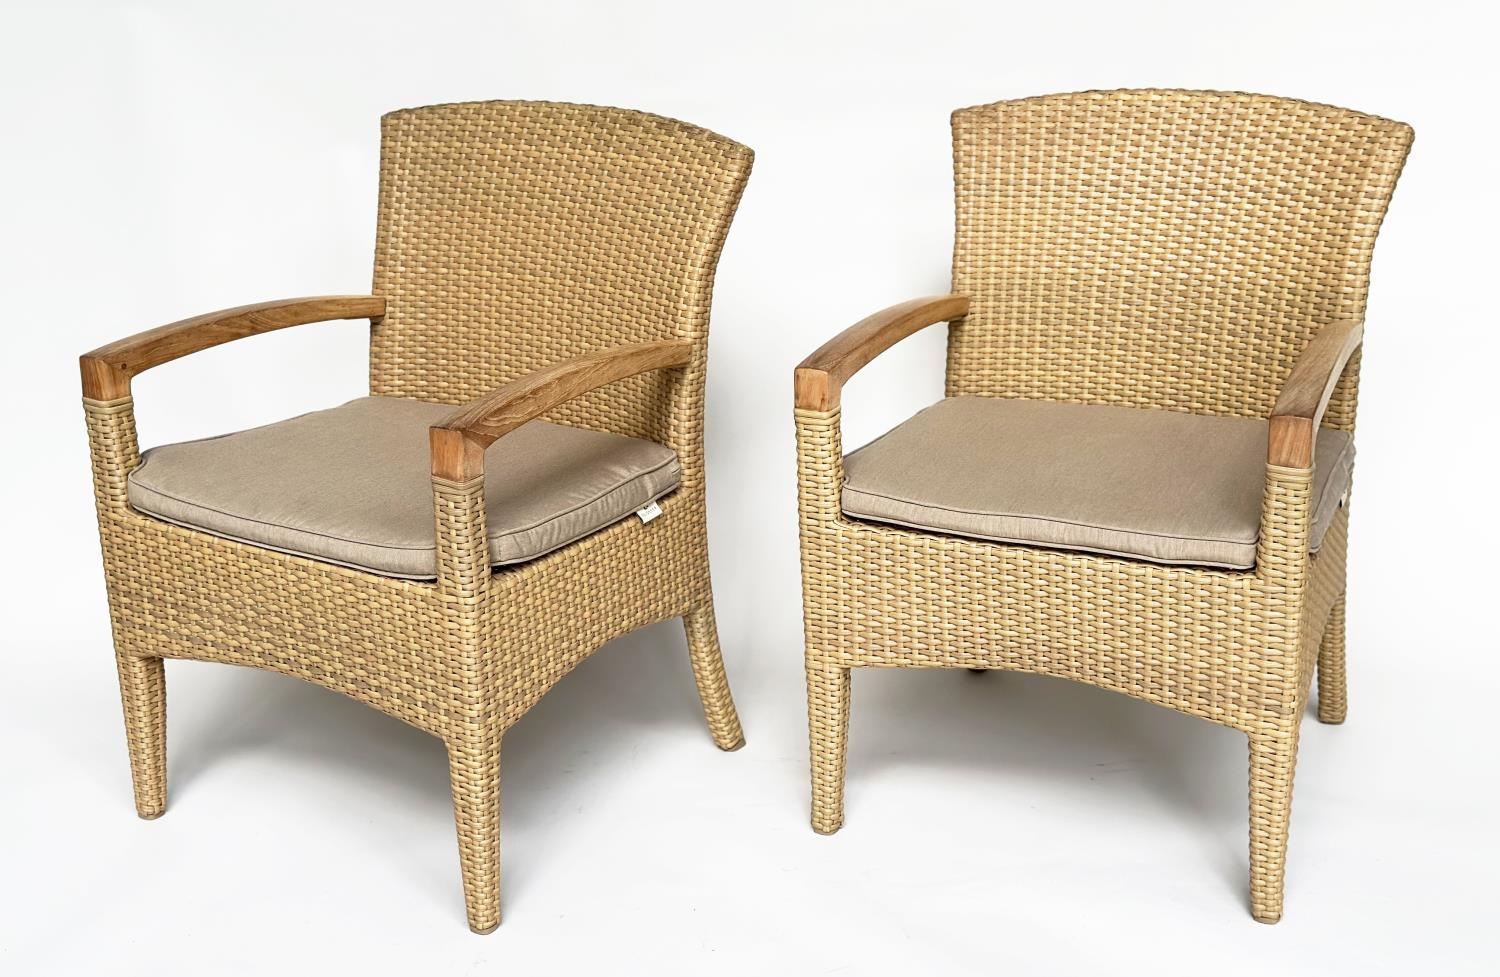 TERRACE/GARDEN ARMCHAIRS BY GLOSTER, a pair, all weather rattan woven and teak framed with cushions,